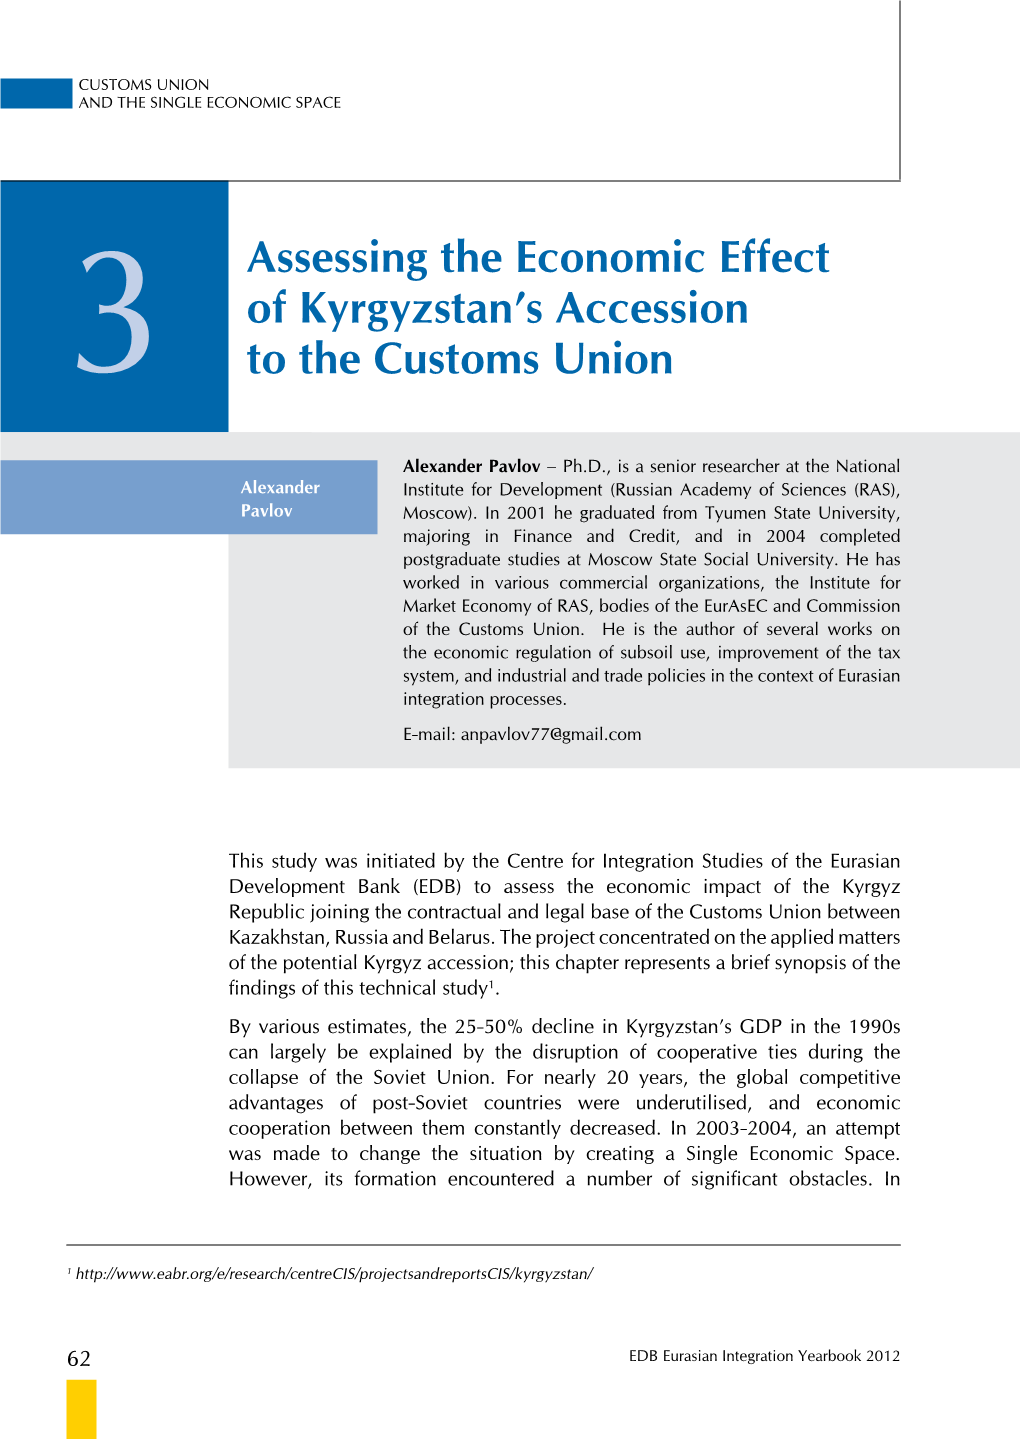 3 Assessing the Economic Effect of Kyrgyzstan's Accession to The